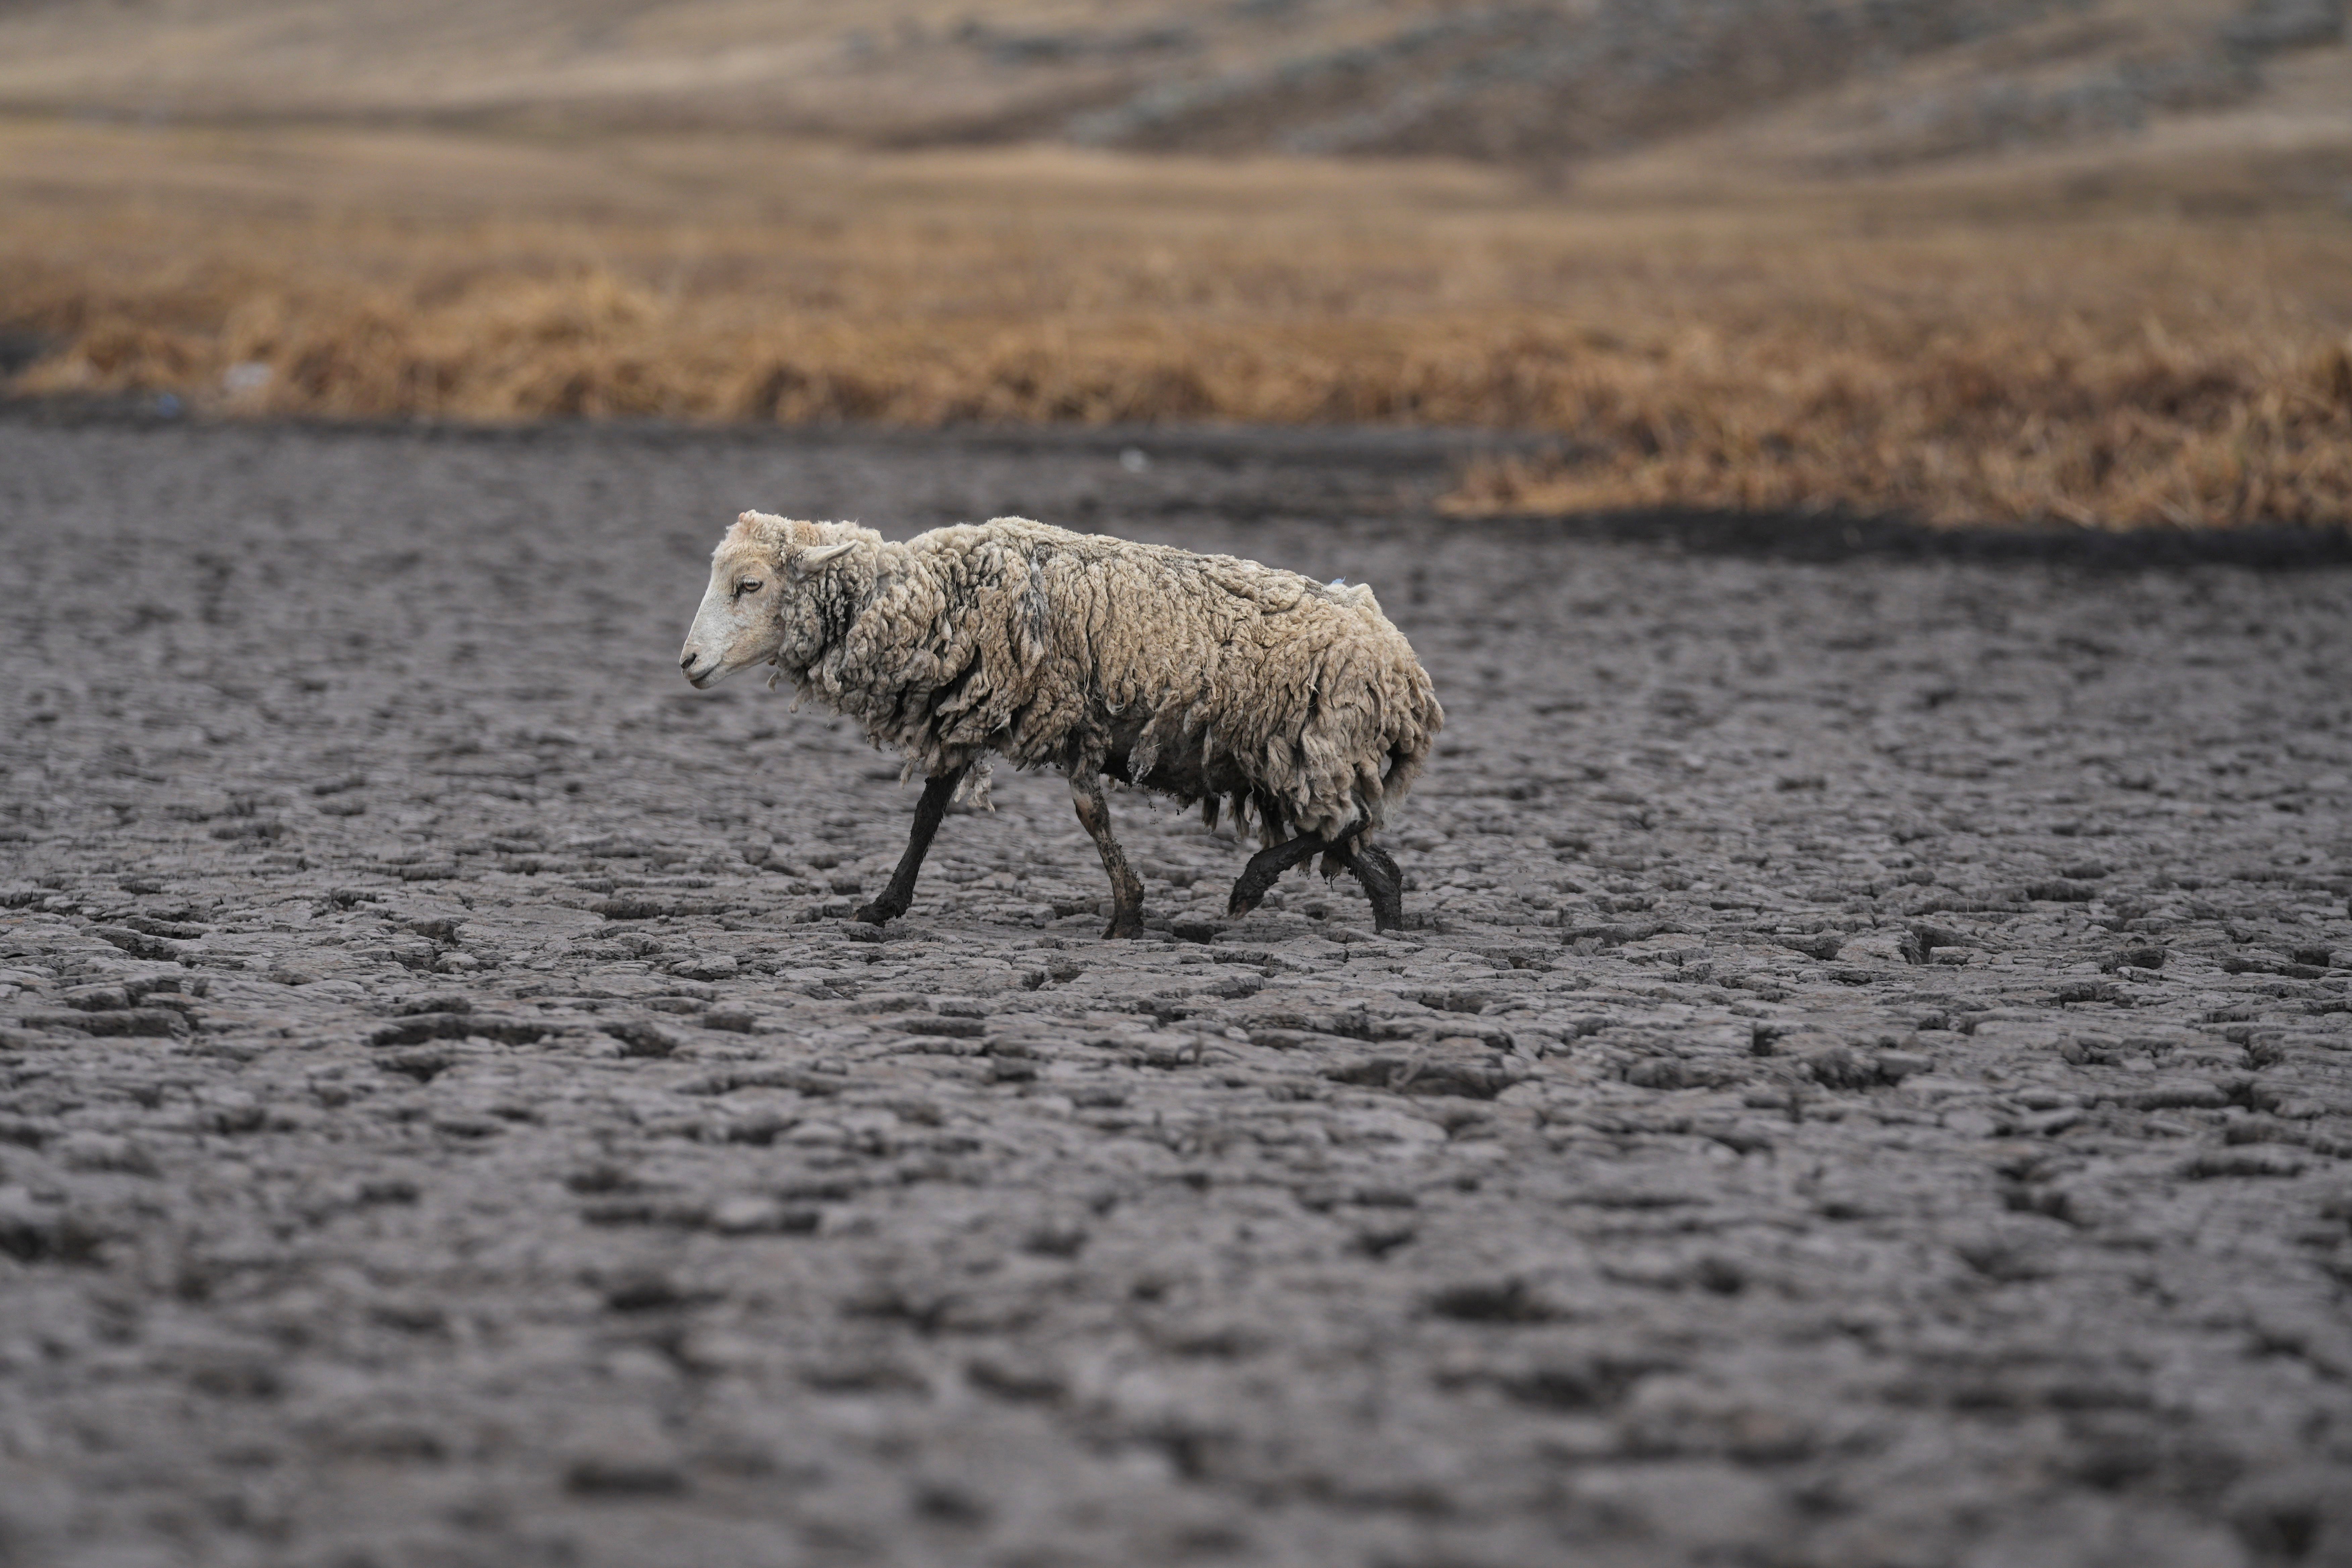 An emaciated sheep walks across the bed of the lagoon. (Photo: Guadalupe Pardo, AP)